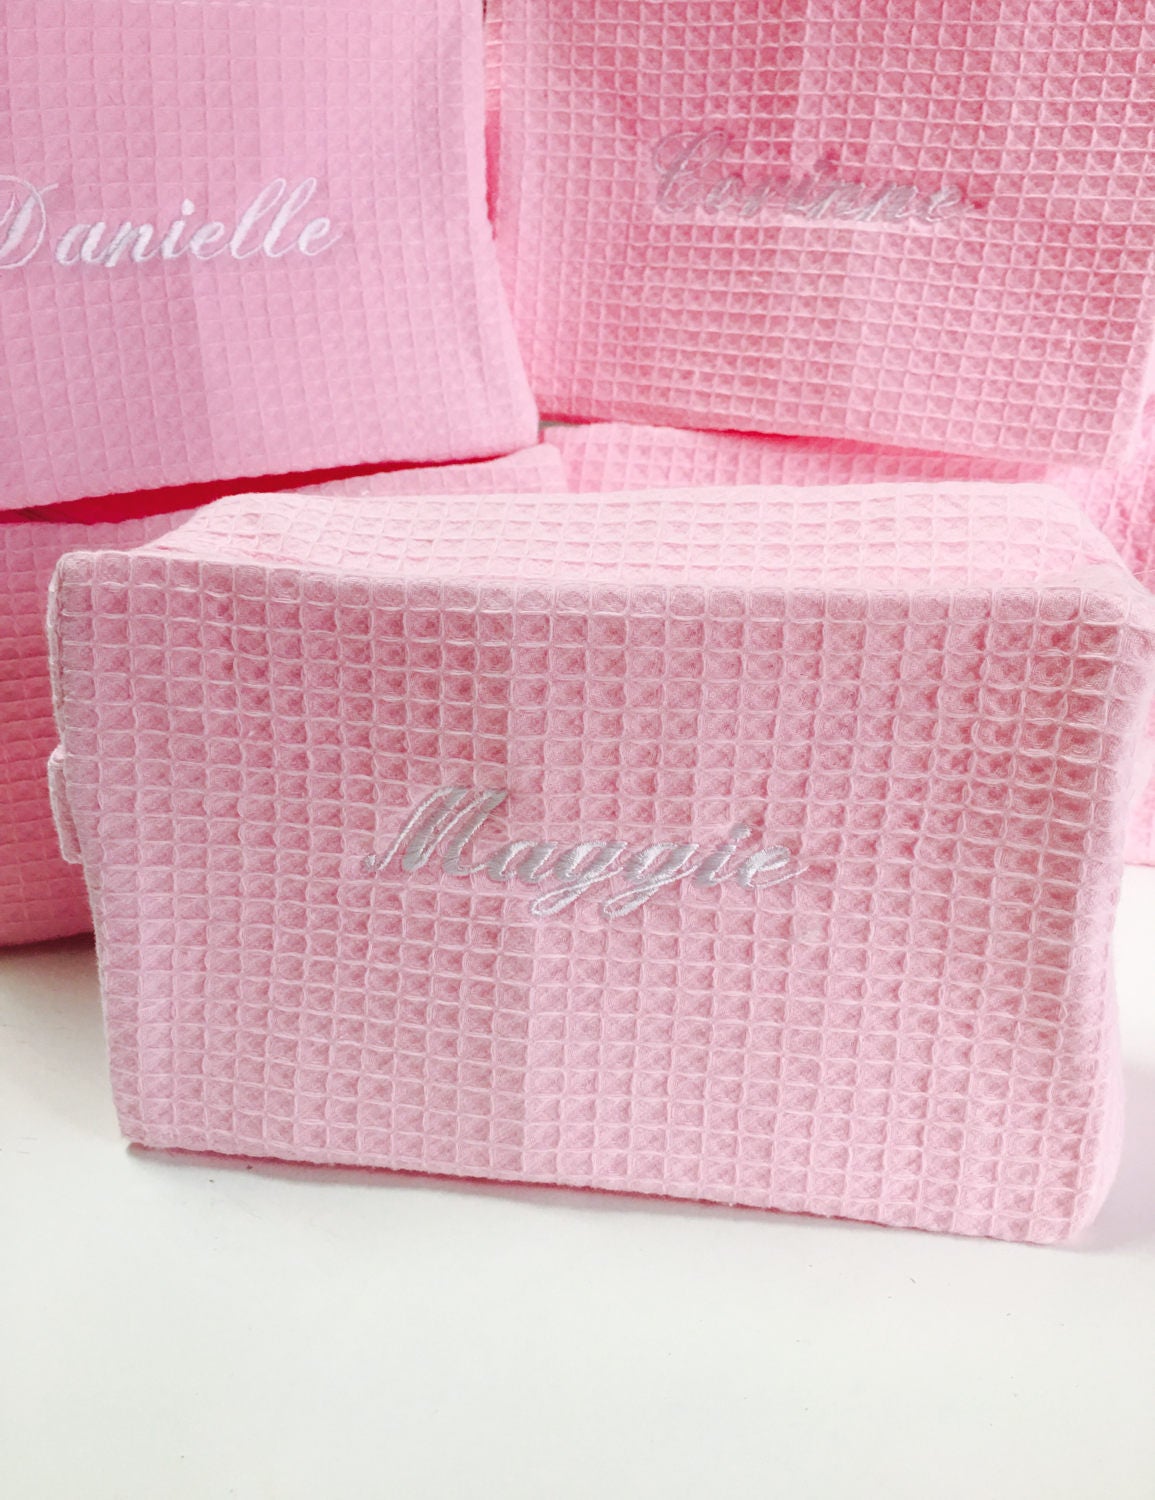 monogrammed makeup bag, personalized cosmetic bag, design your own